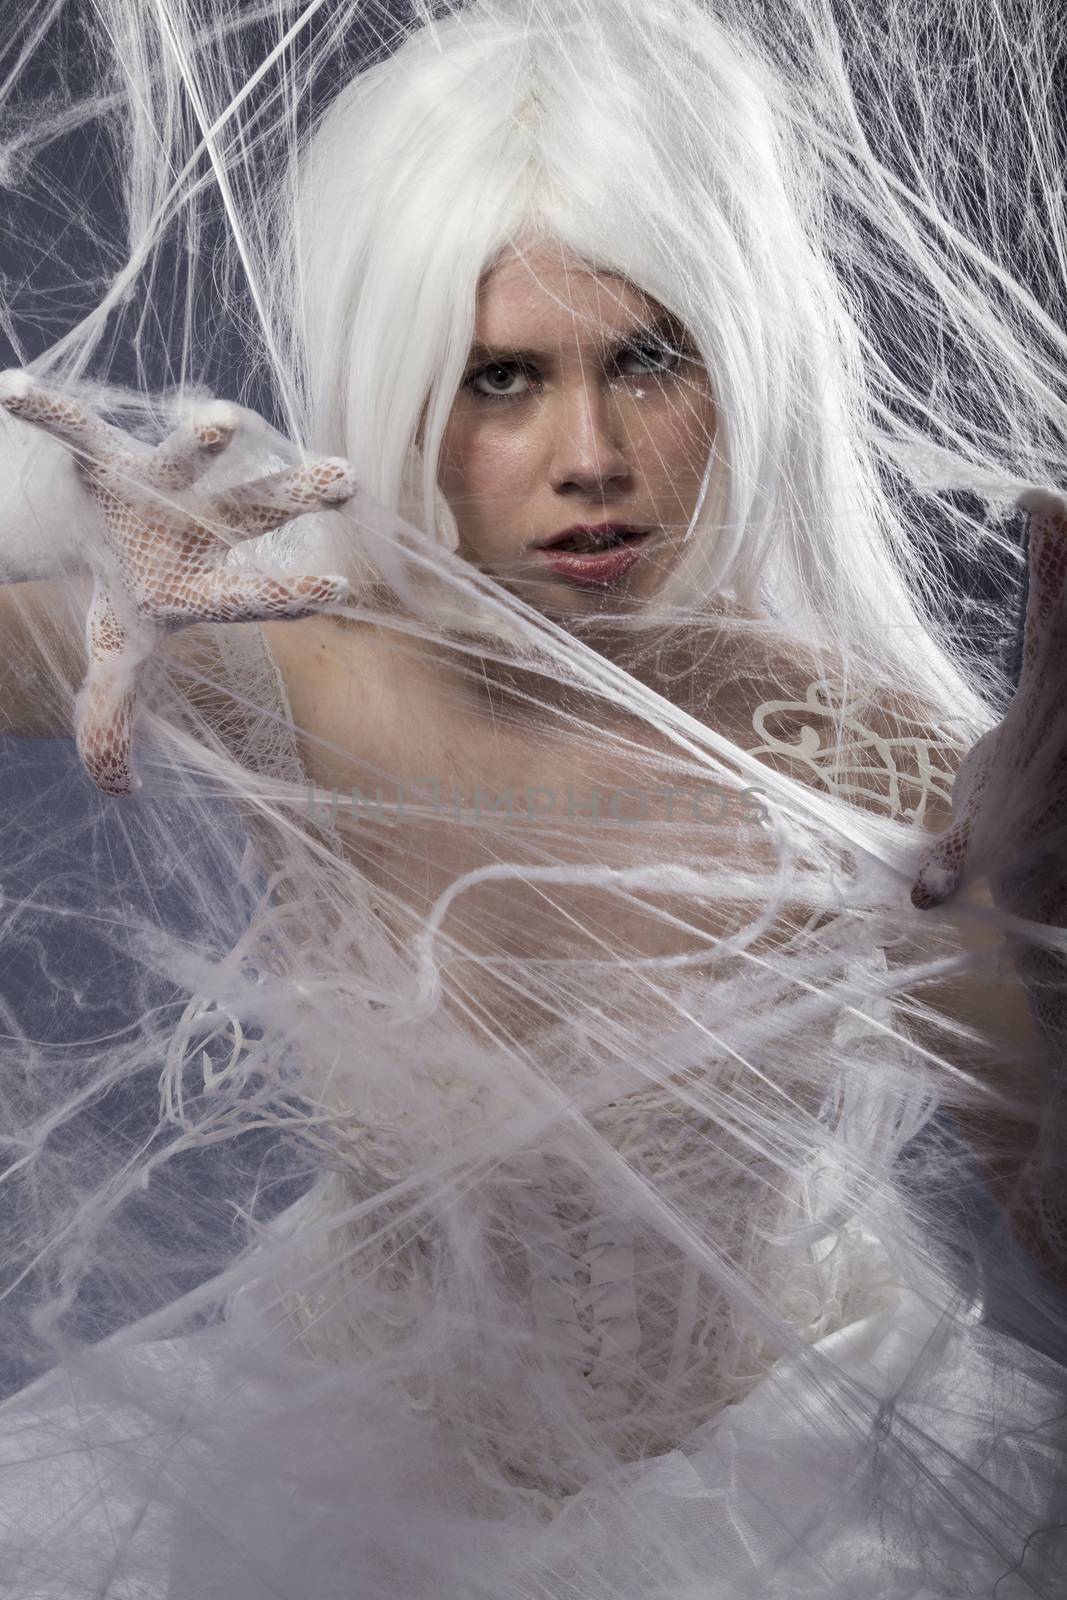 beautiful young woman trapped in a spider web, communications by FernandoCortes